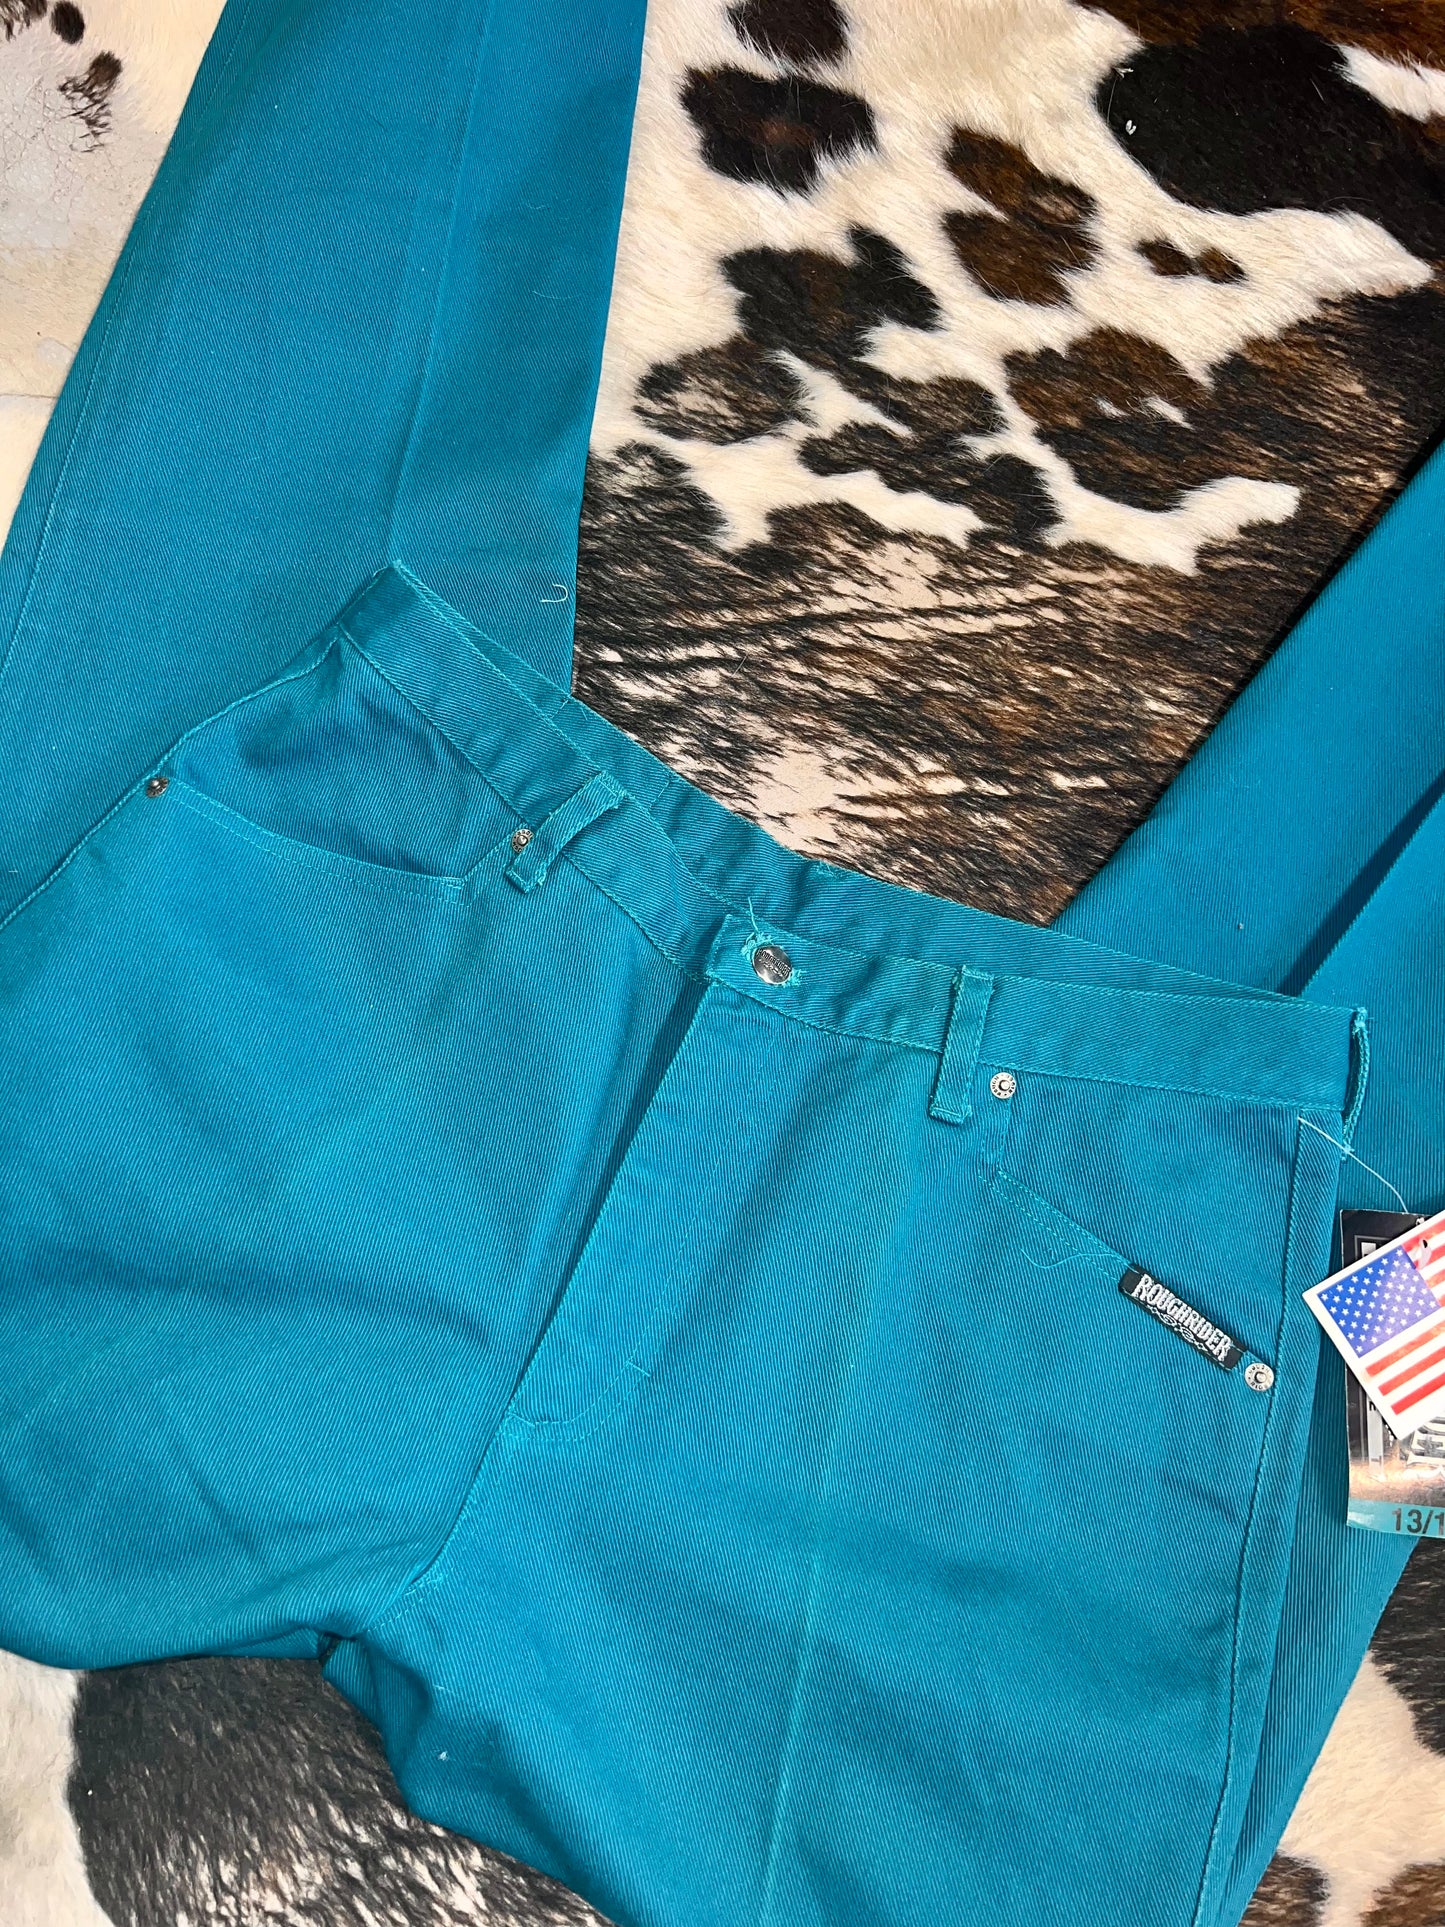 Turquoise Vintage RoughRiders